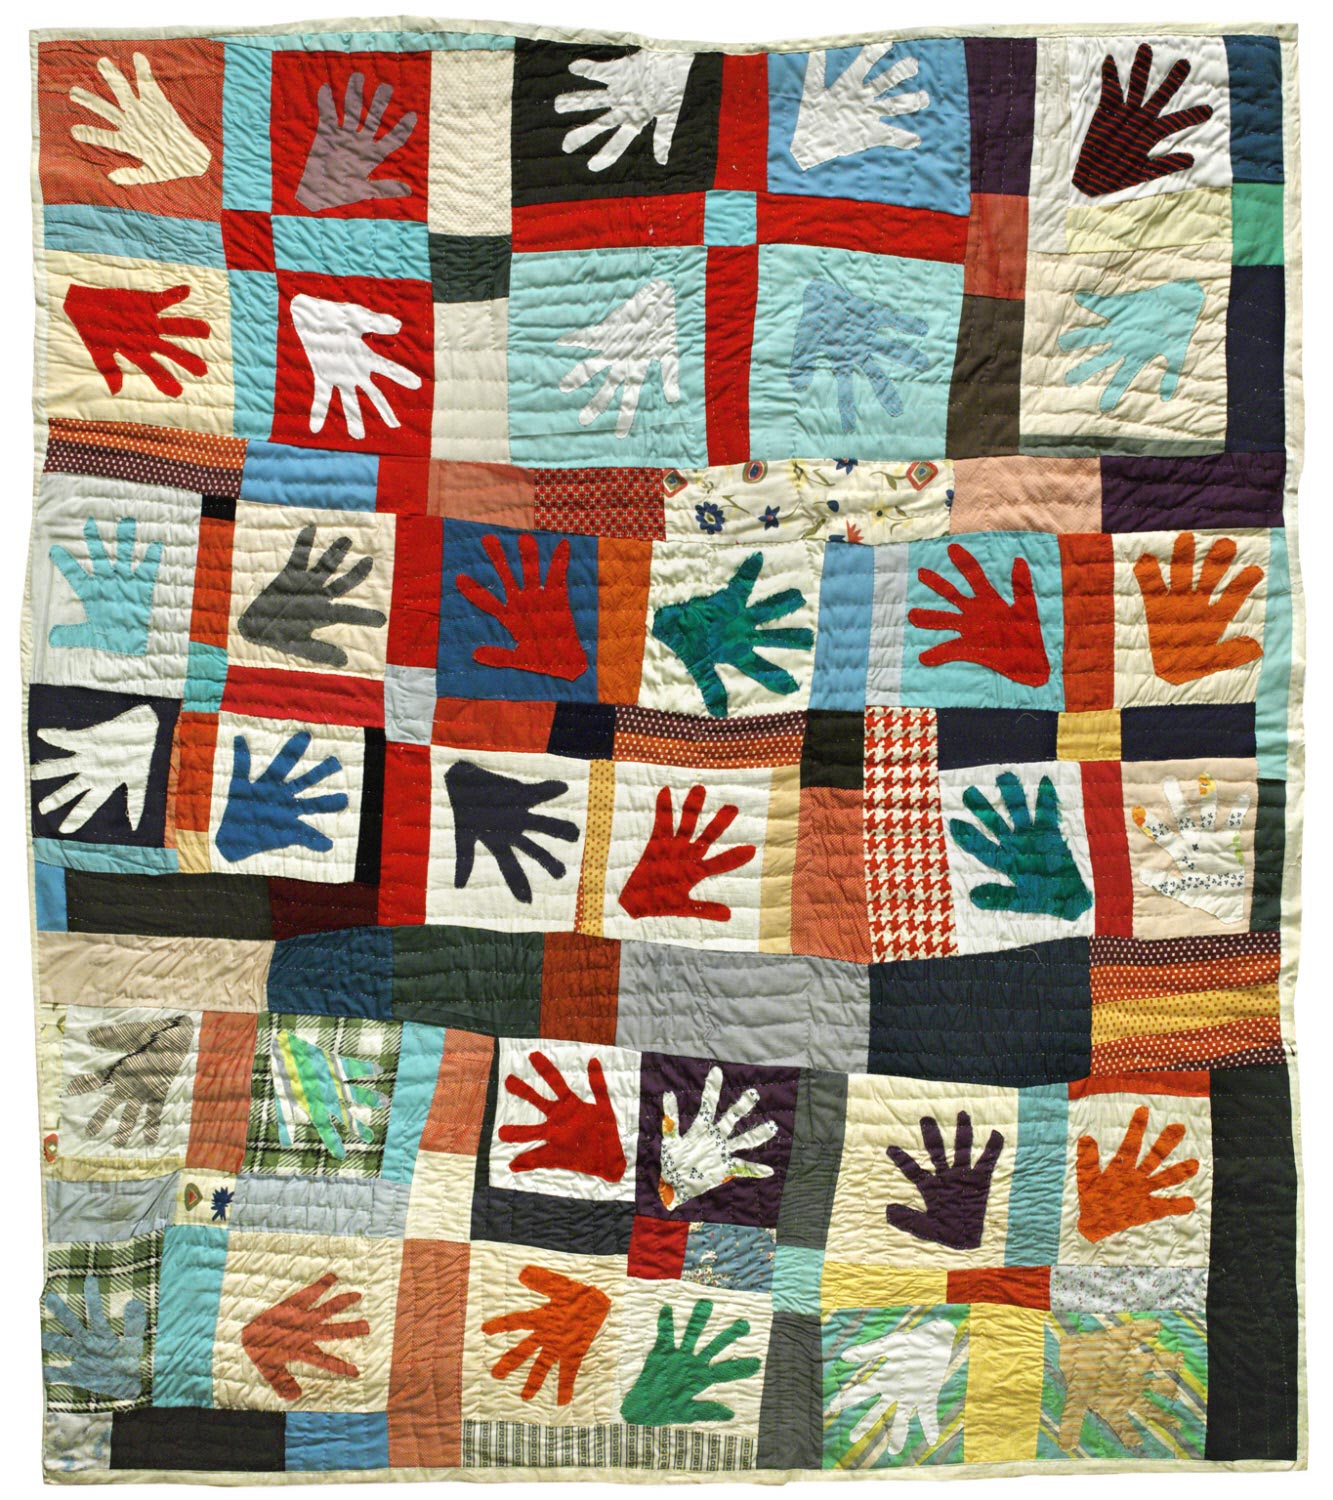 Image of a quilt with hand silohuettes in bright colors.